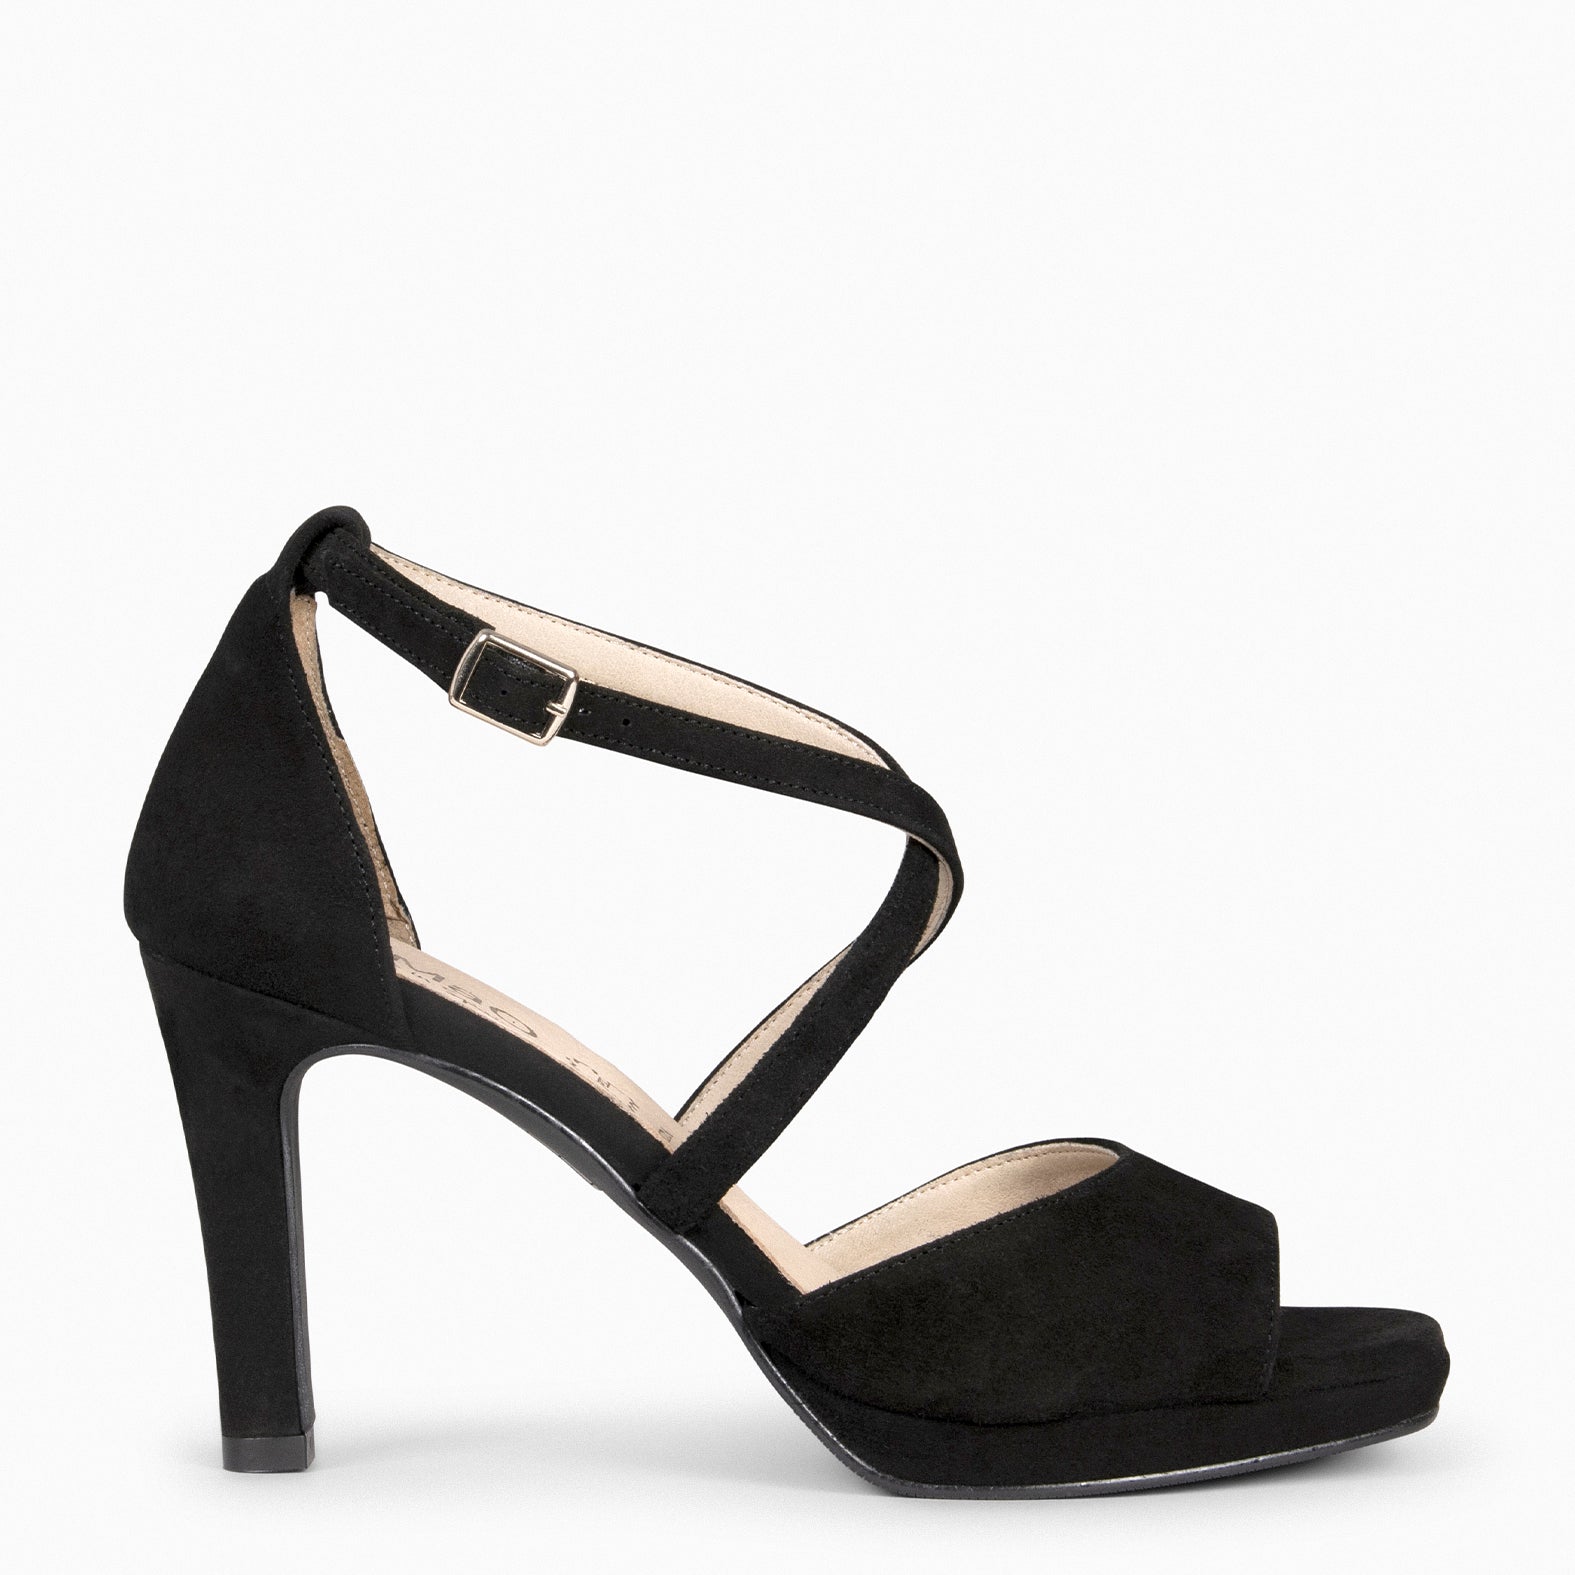 ROSSA - BLACK party sandals with heel